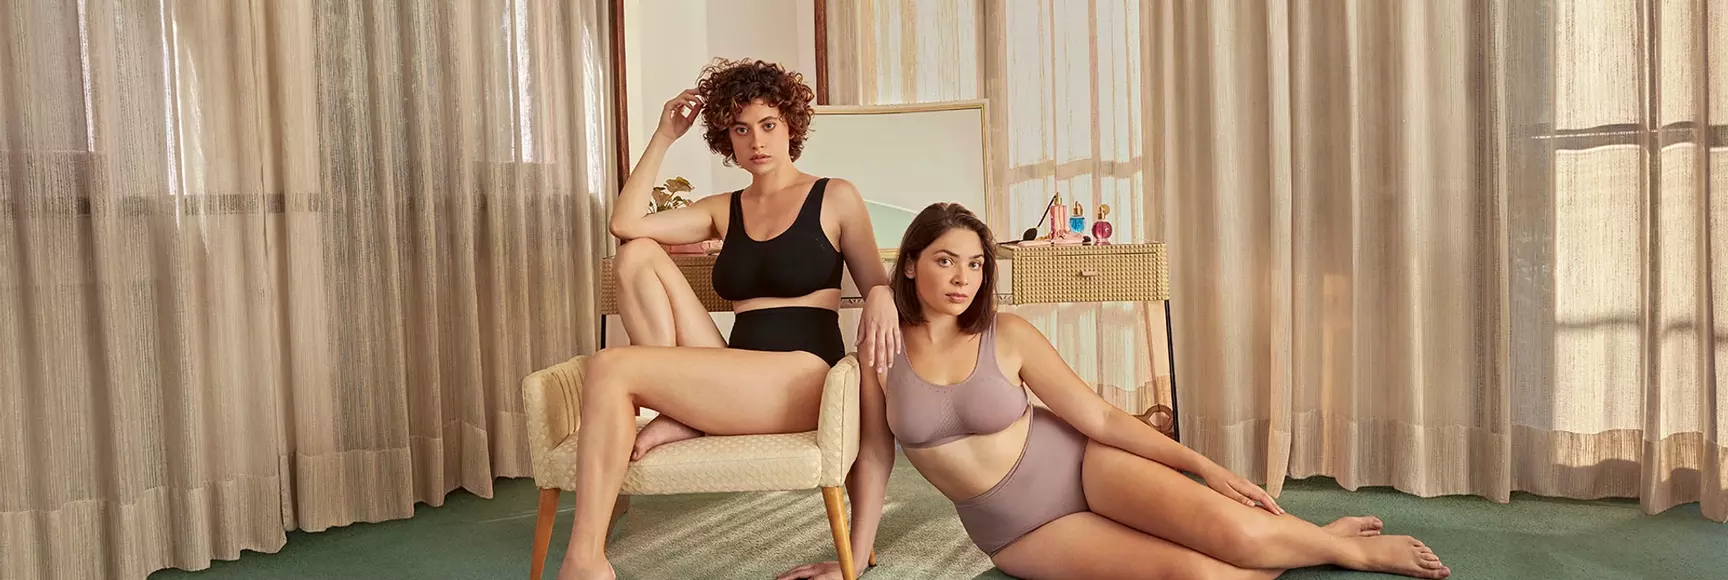 Two women model Pompea’s new seamless bras and panties made with LYCRA® ADAPTIV fiber for a comfortable, second-skin fit.